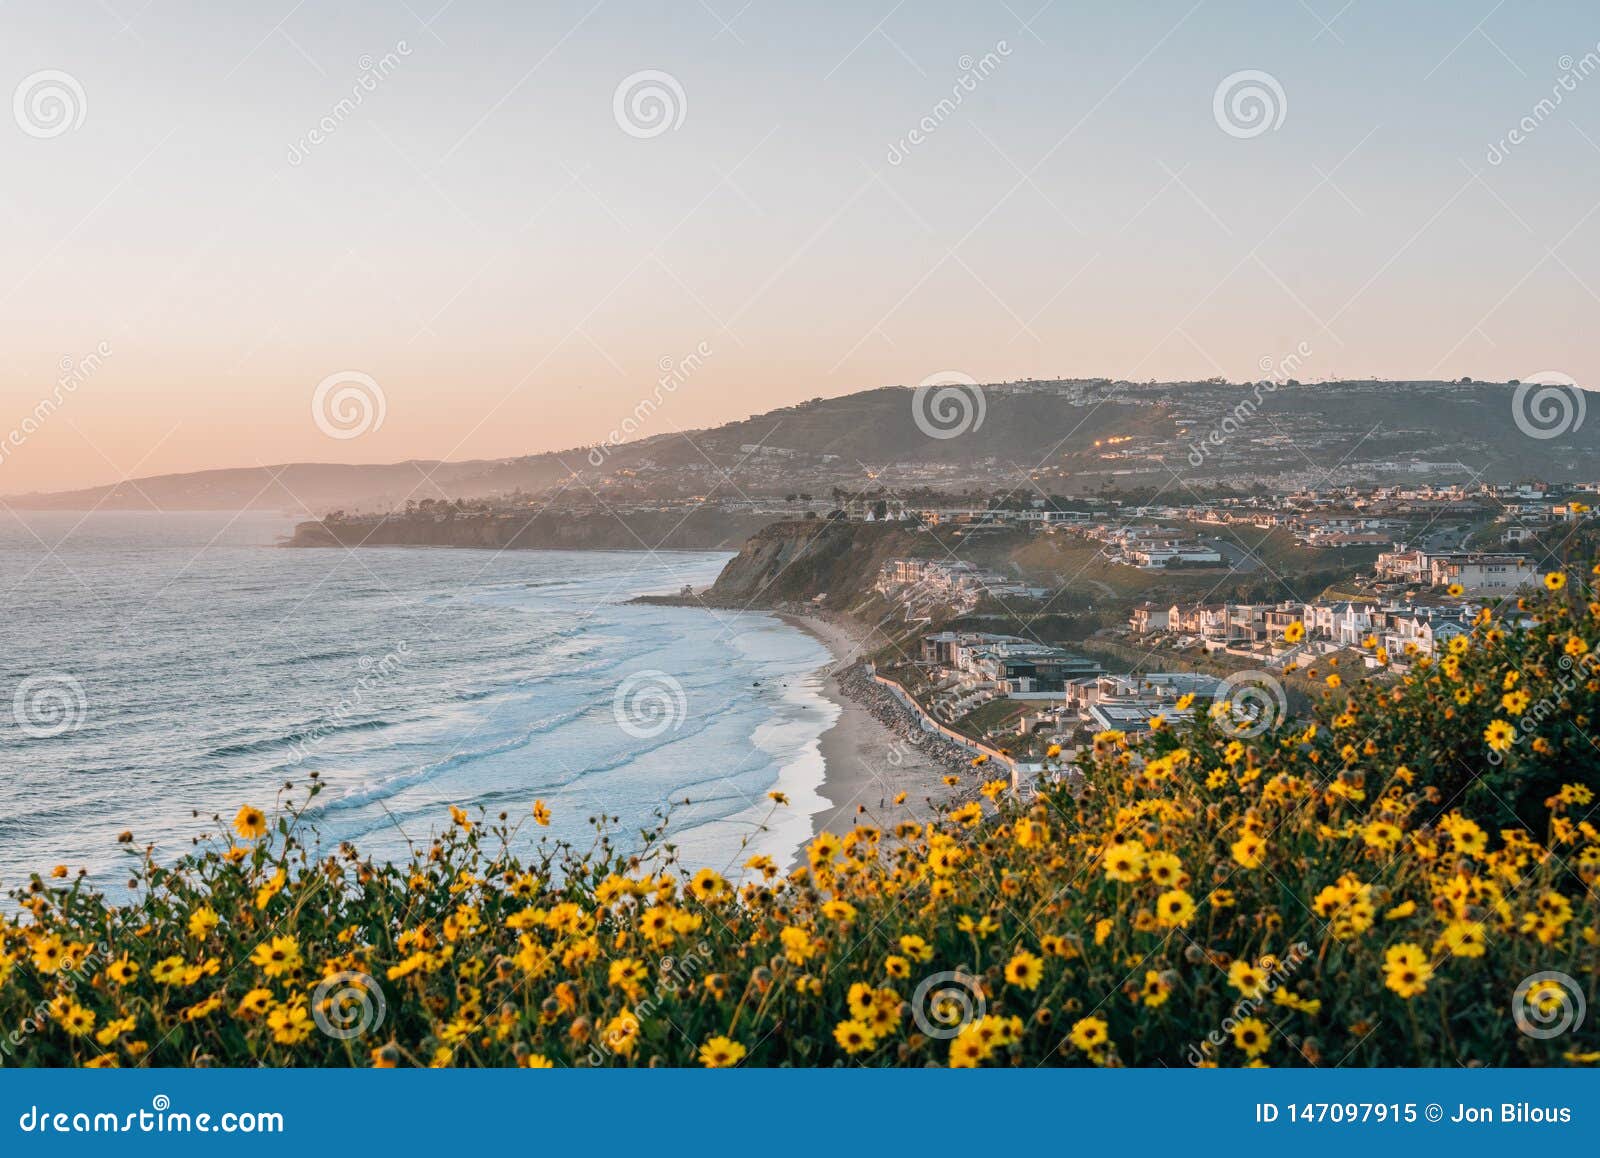 yellow flowers and view of strand beach from dana point headlands conservation area, in dana point, orange county, california